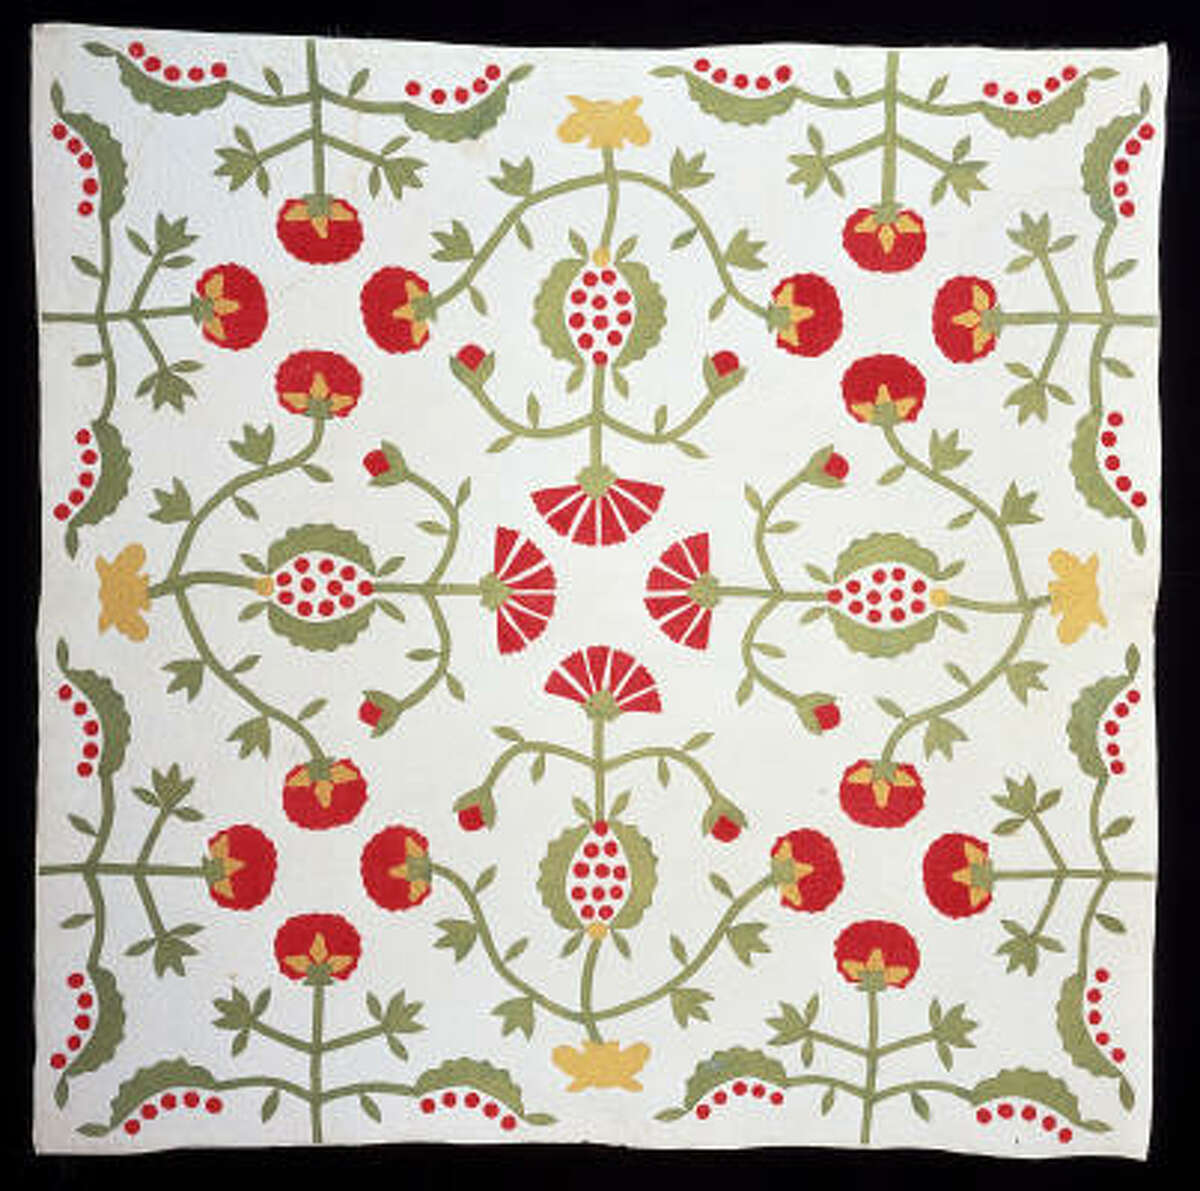 Applique Quilt, about 1850, by Lucy Kemper West. The DAR Museum Collection: Quilts of a Young Country at the International Quilt Festival.